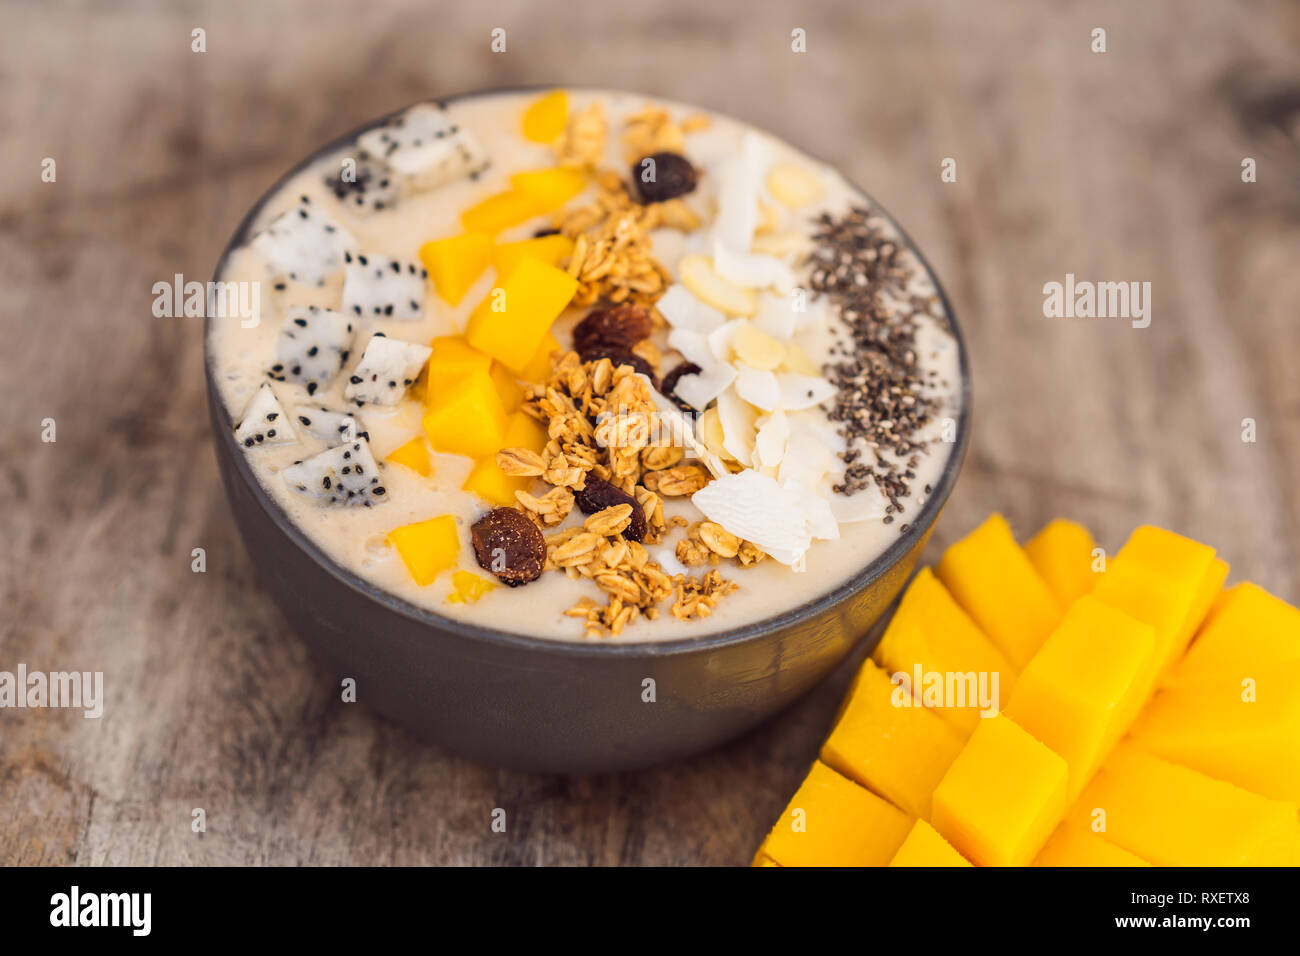 https://c8.alamy.com/comp/RXETX8/smoothie-bowls-made-with-mango-banana-granola-grated-coconut-dragon-fruit-chia-seeds-and-mint-on-wooden-background-concept-fruits-vitamins-RXETX8.jpg